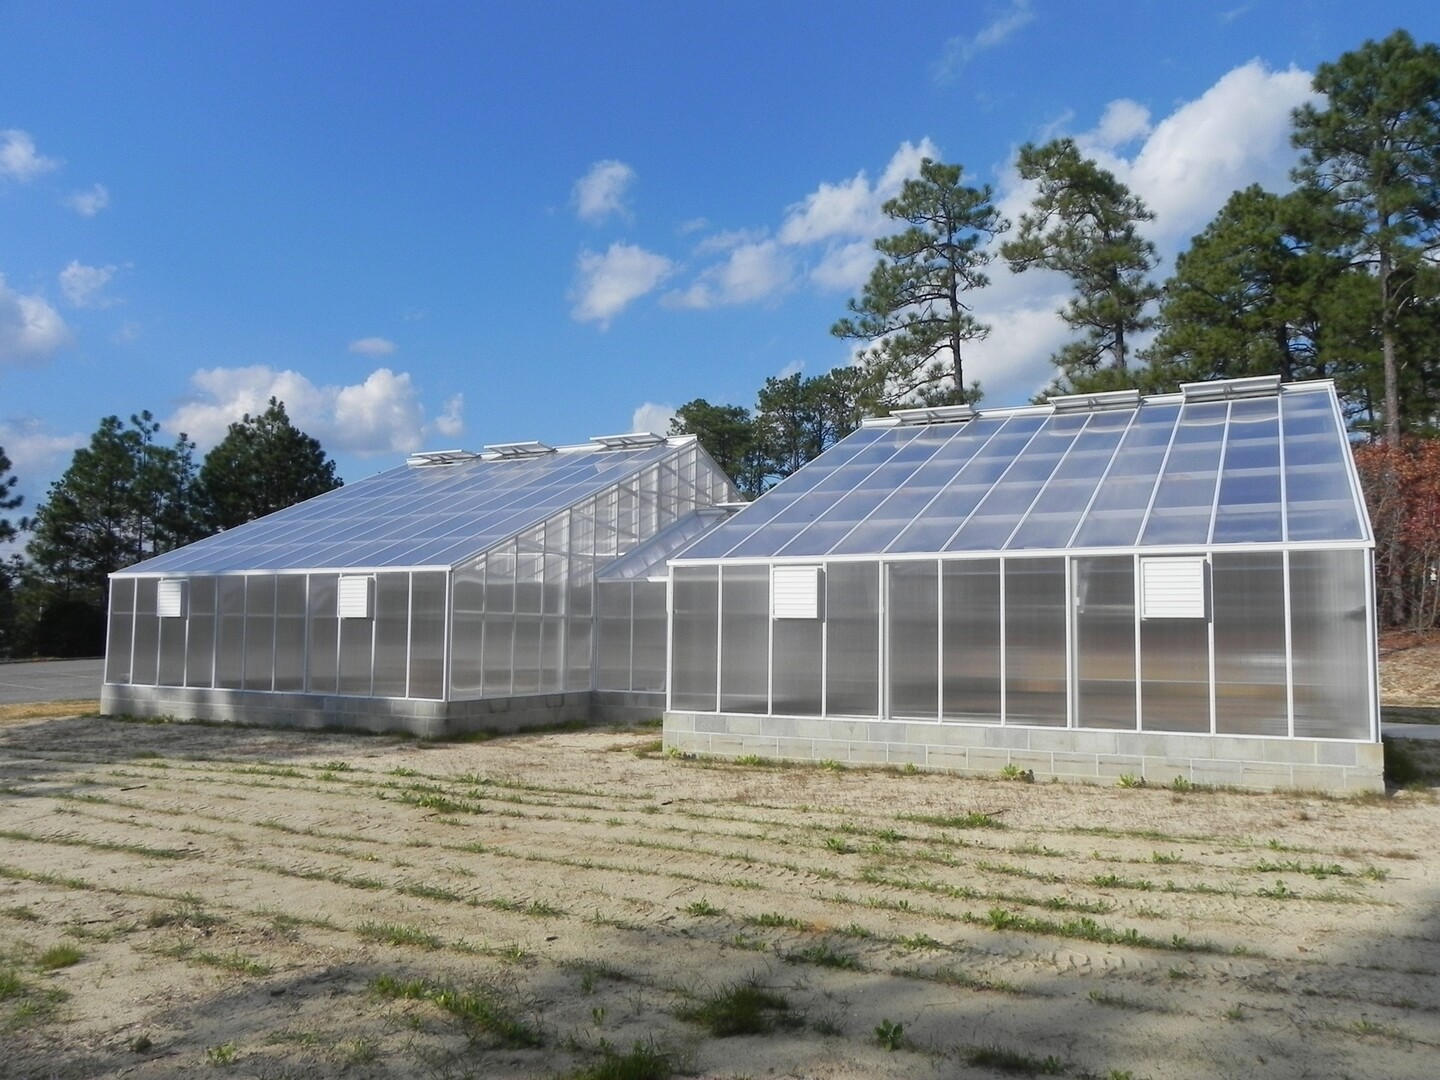 Double 40 '  x  22' with connector TR Greenhouses-University of south Carolina greenhouse